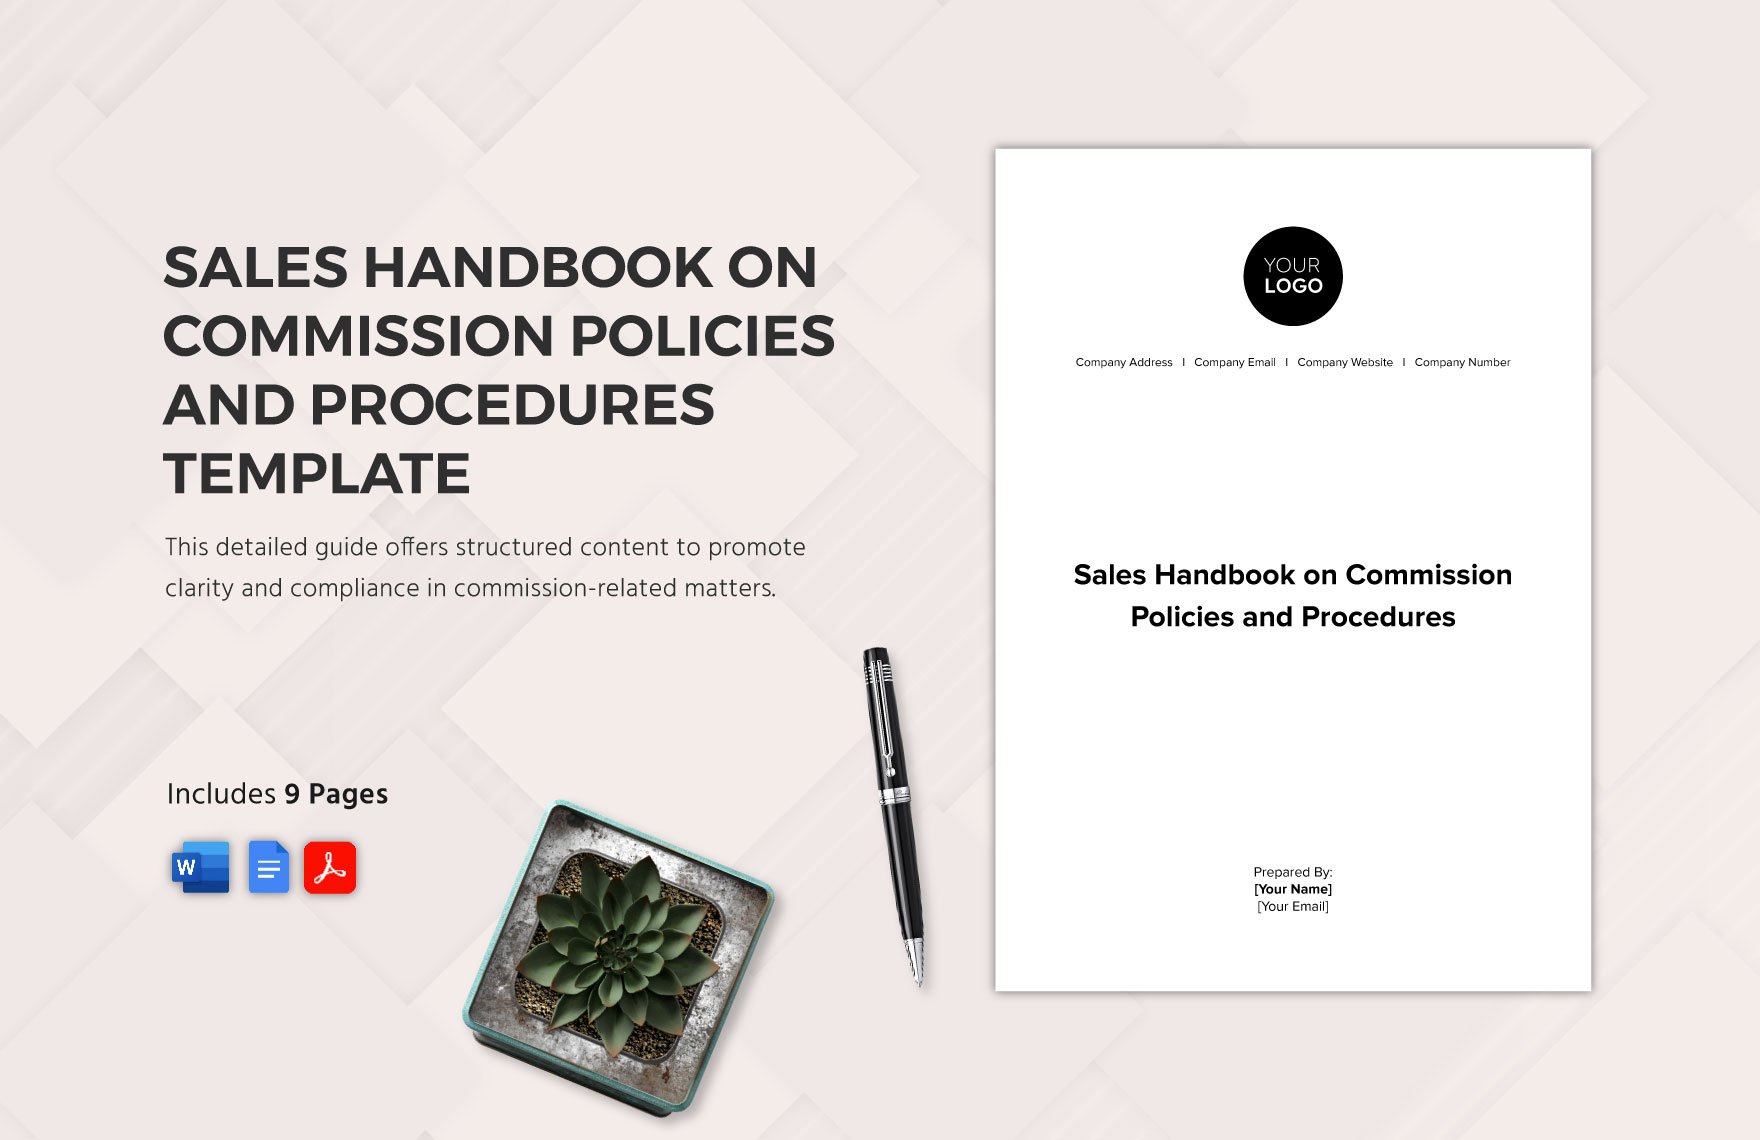 Sales Handbook on Commission Policies and Procedures Template